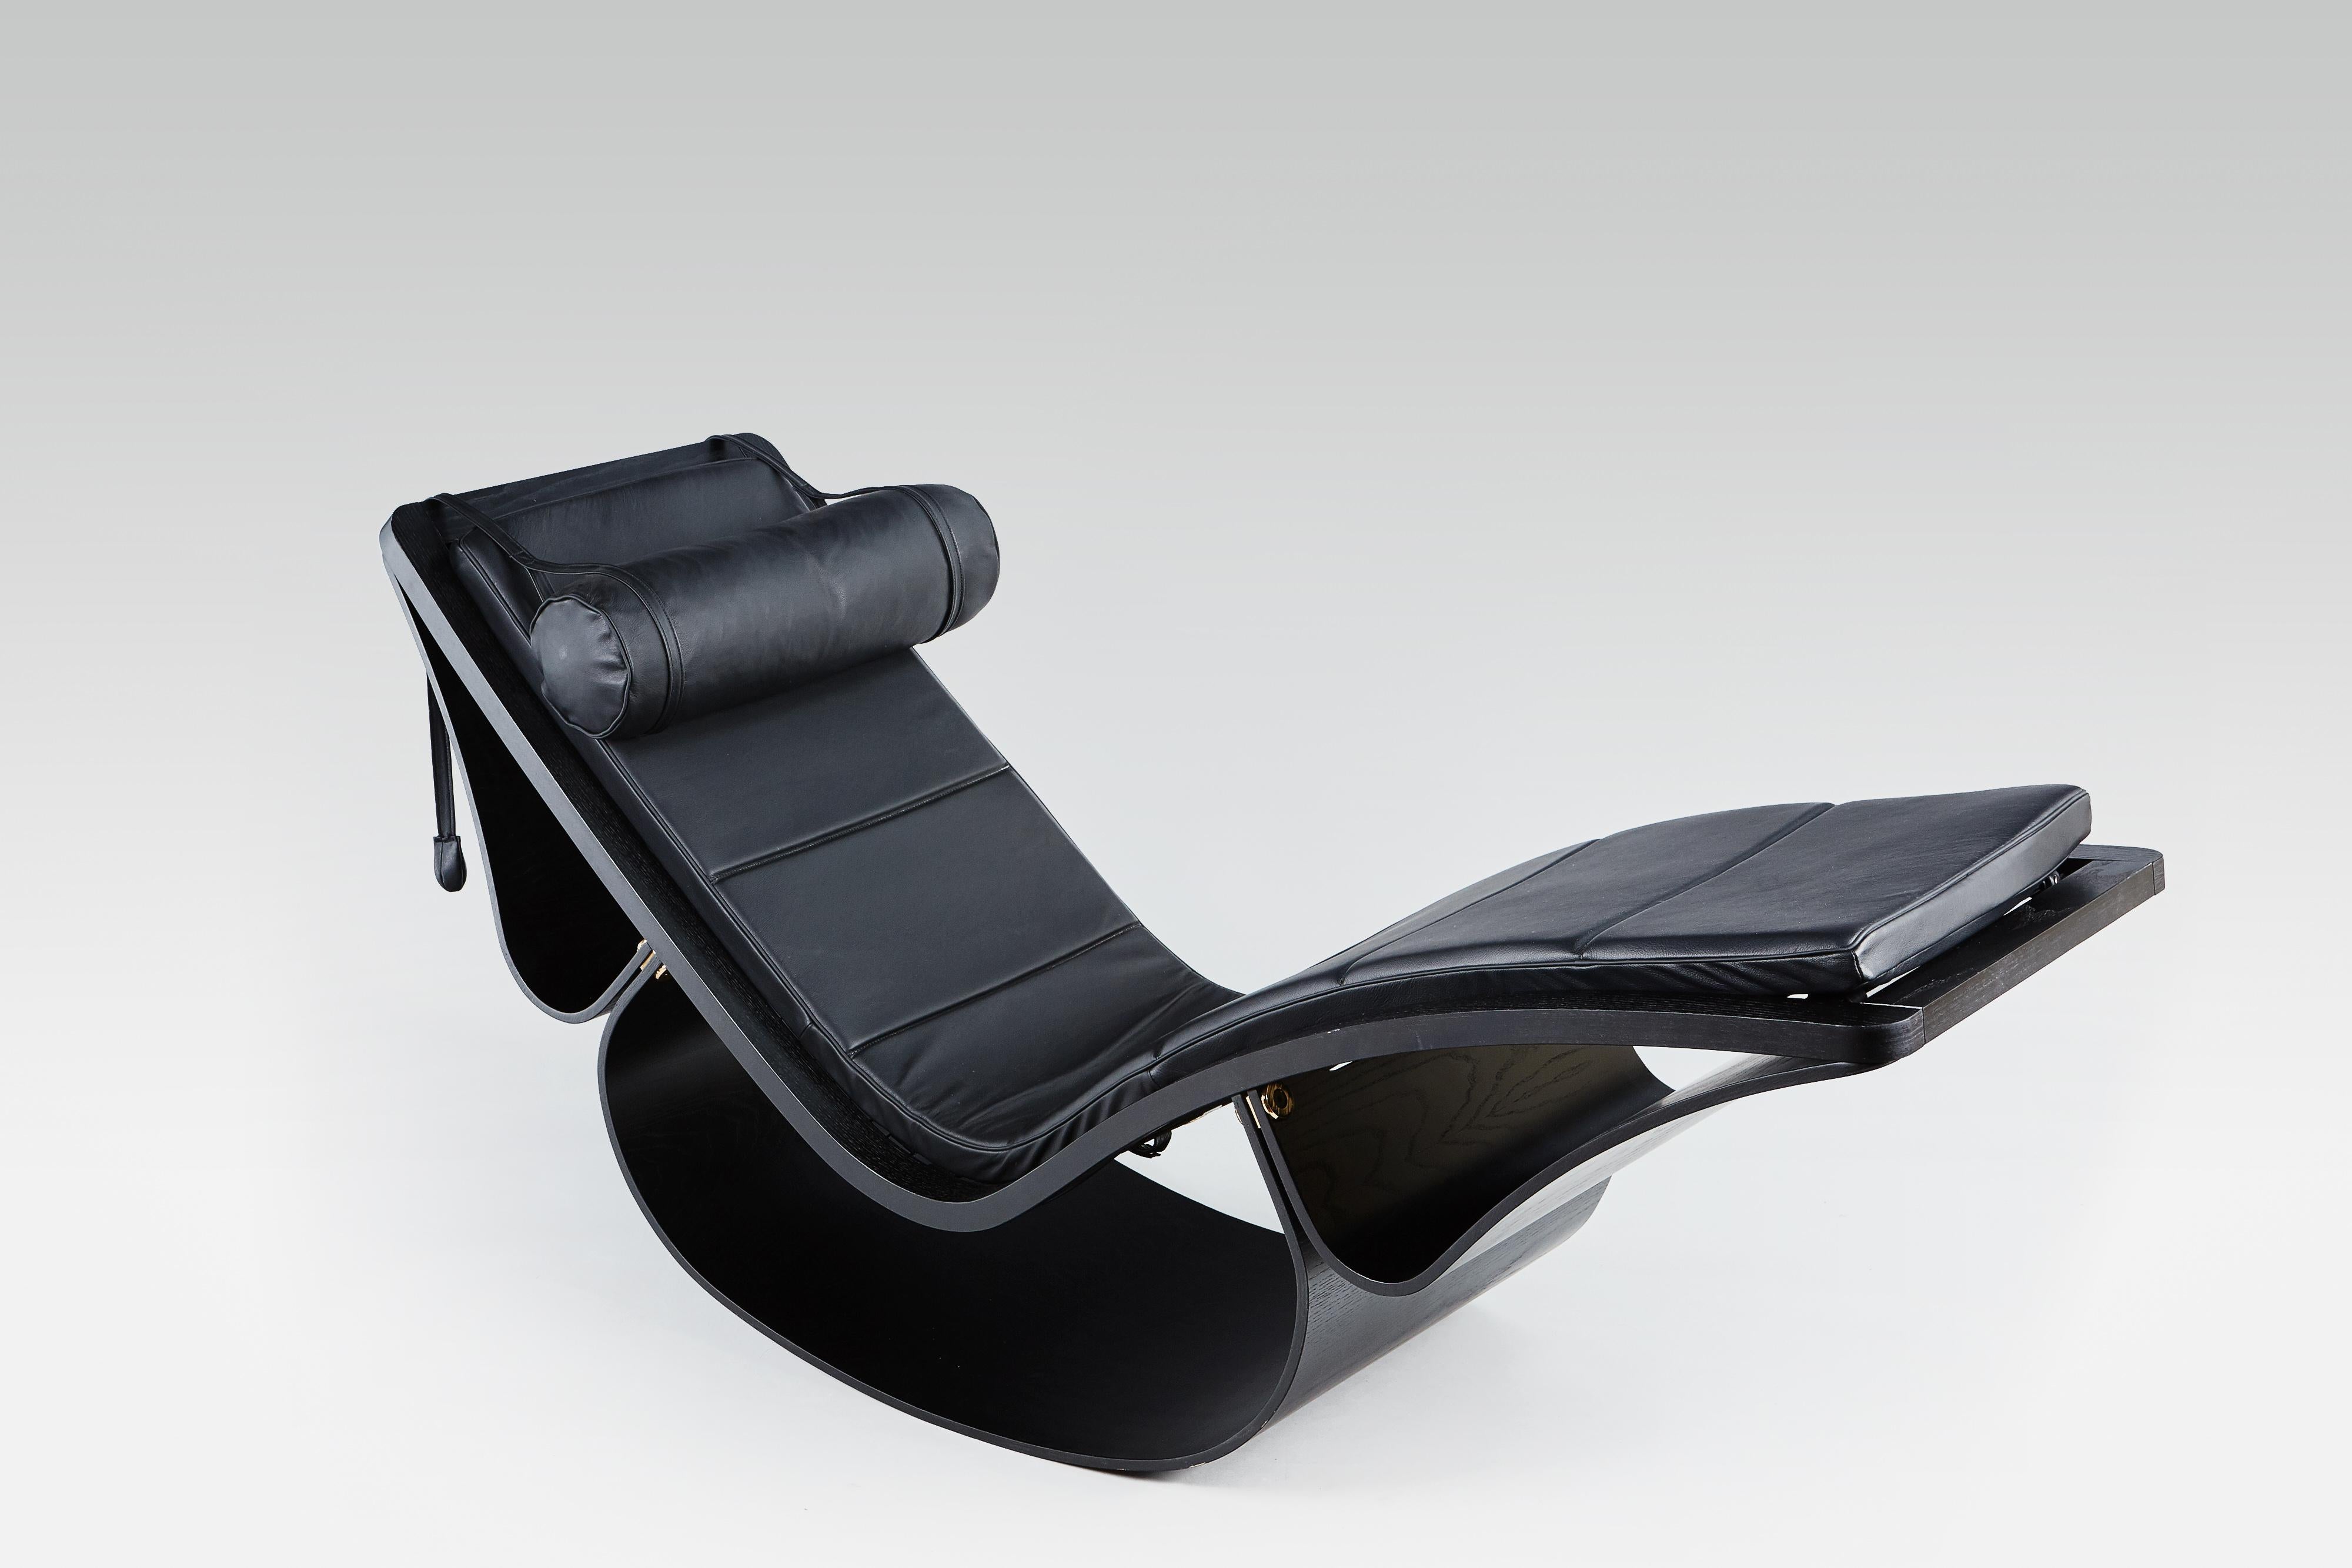 Iconic chaise lounge designed by the famous Brazilian architect Oscar Niemeyer (1907-2012) in 1978 in collaboration with his daughter Anna Maria Niemeyer. He christened this piece Rio after his birth place Rio de Janeiro. Manufactured in black